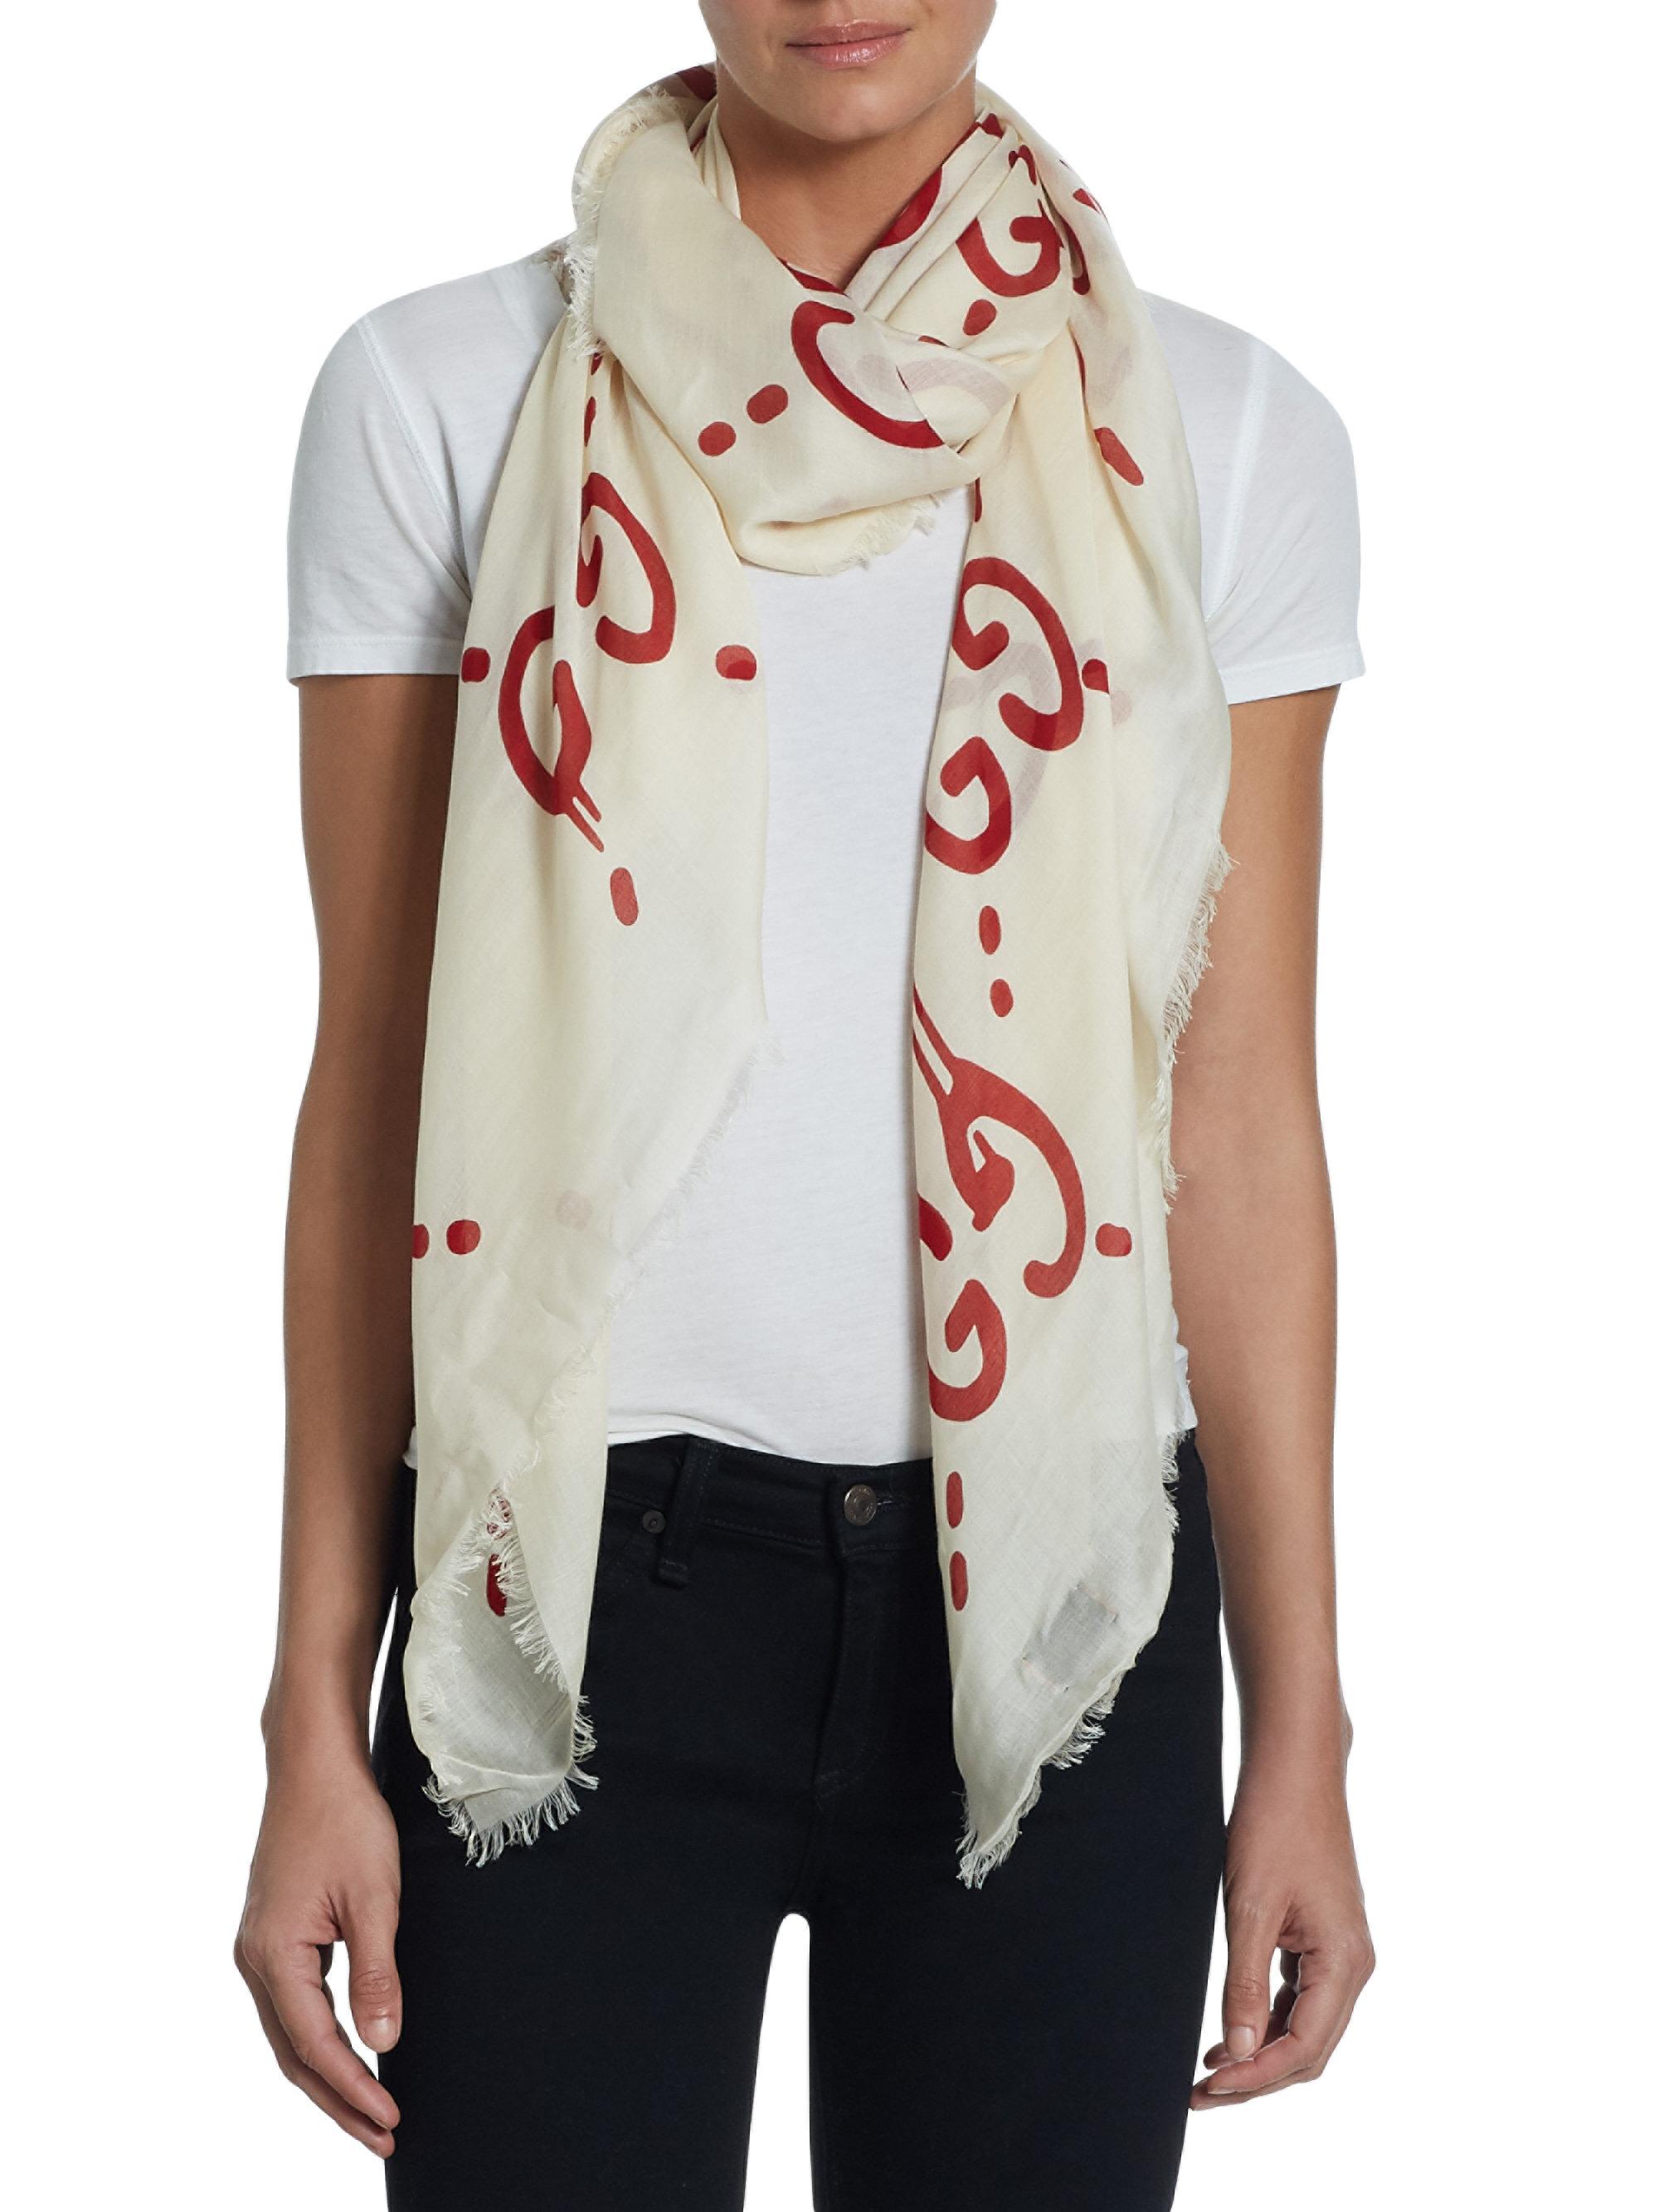 Gucci Ghost Scarf Top Sellers, 54% OFF | www.pegasusaerogroup.com